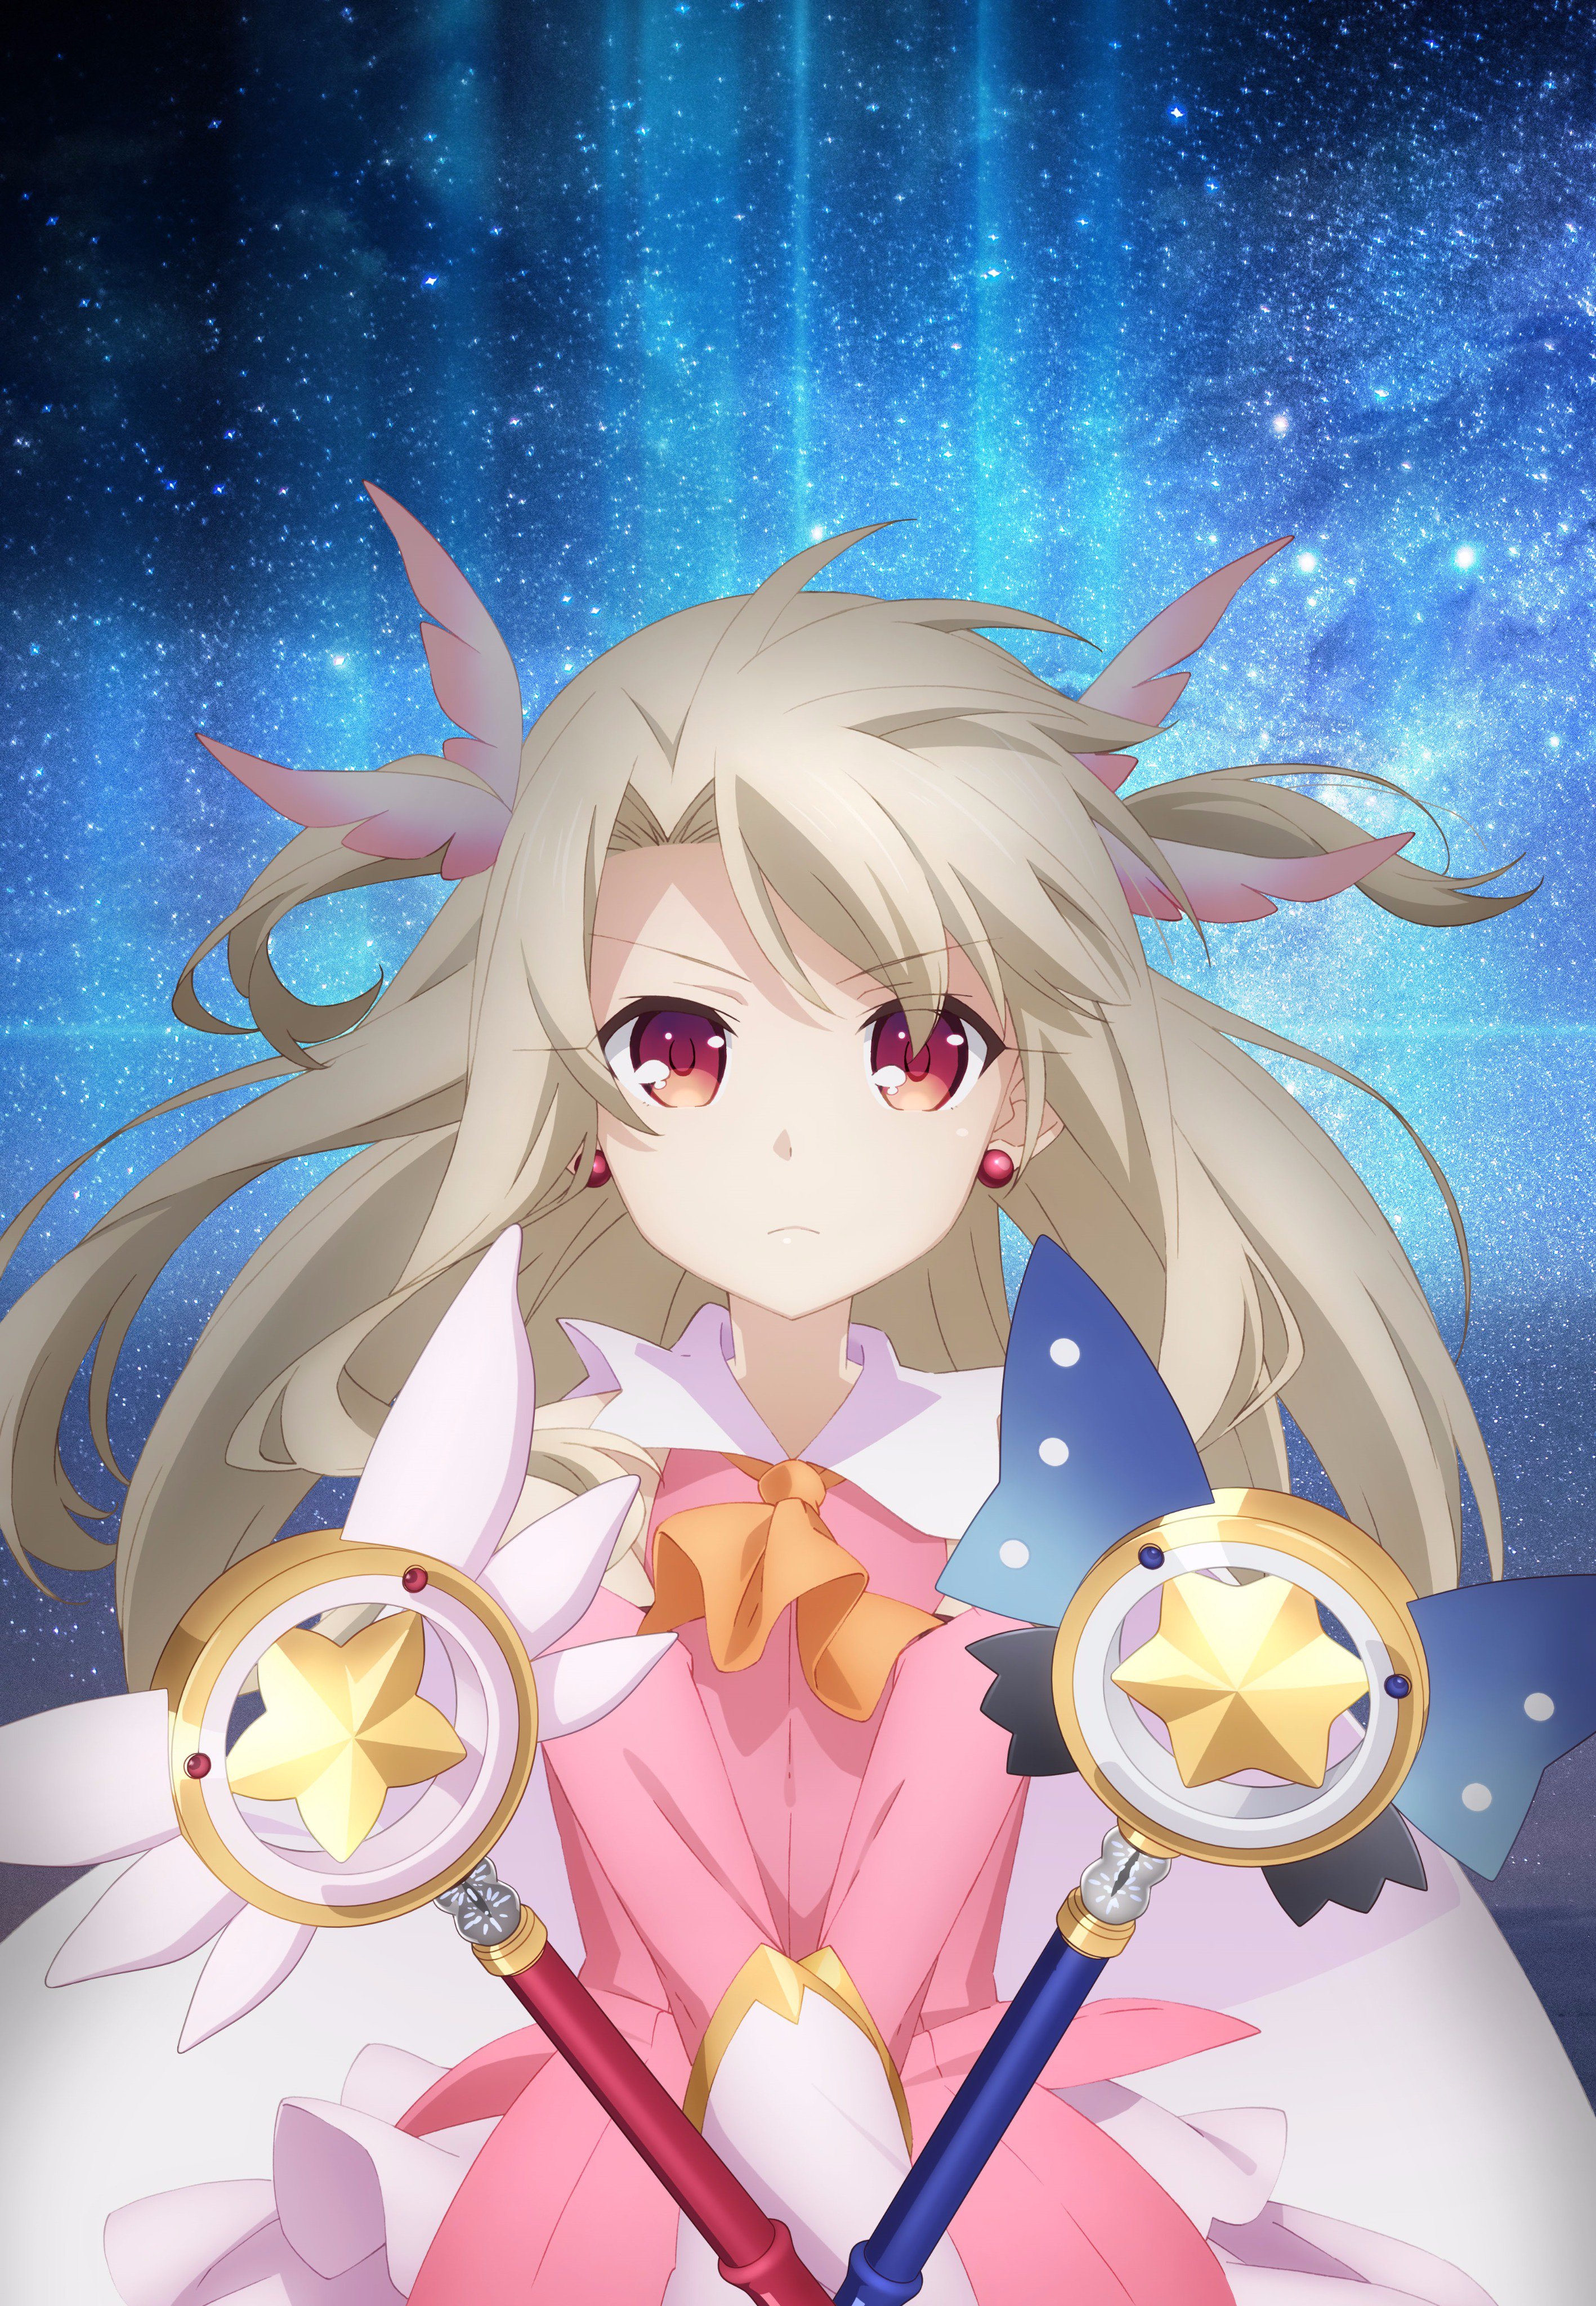 Fate/kaleid liner Prisma☆Illya gets another series